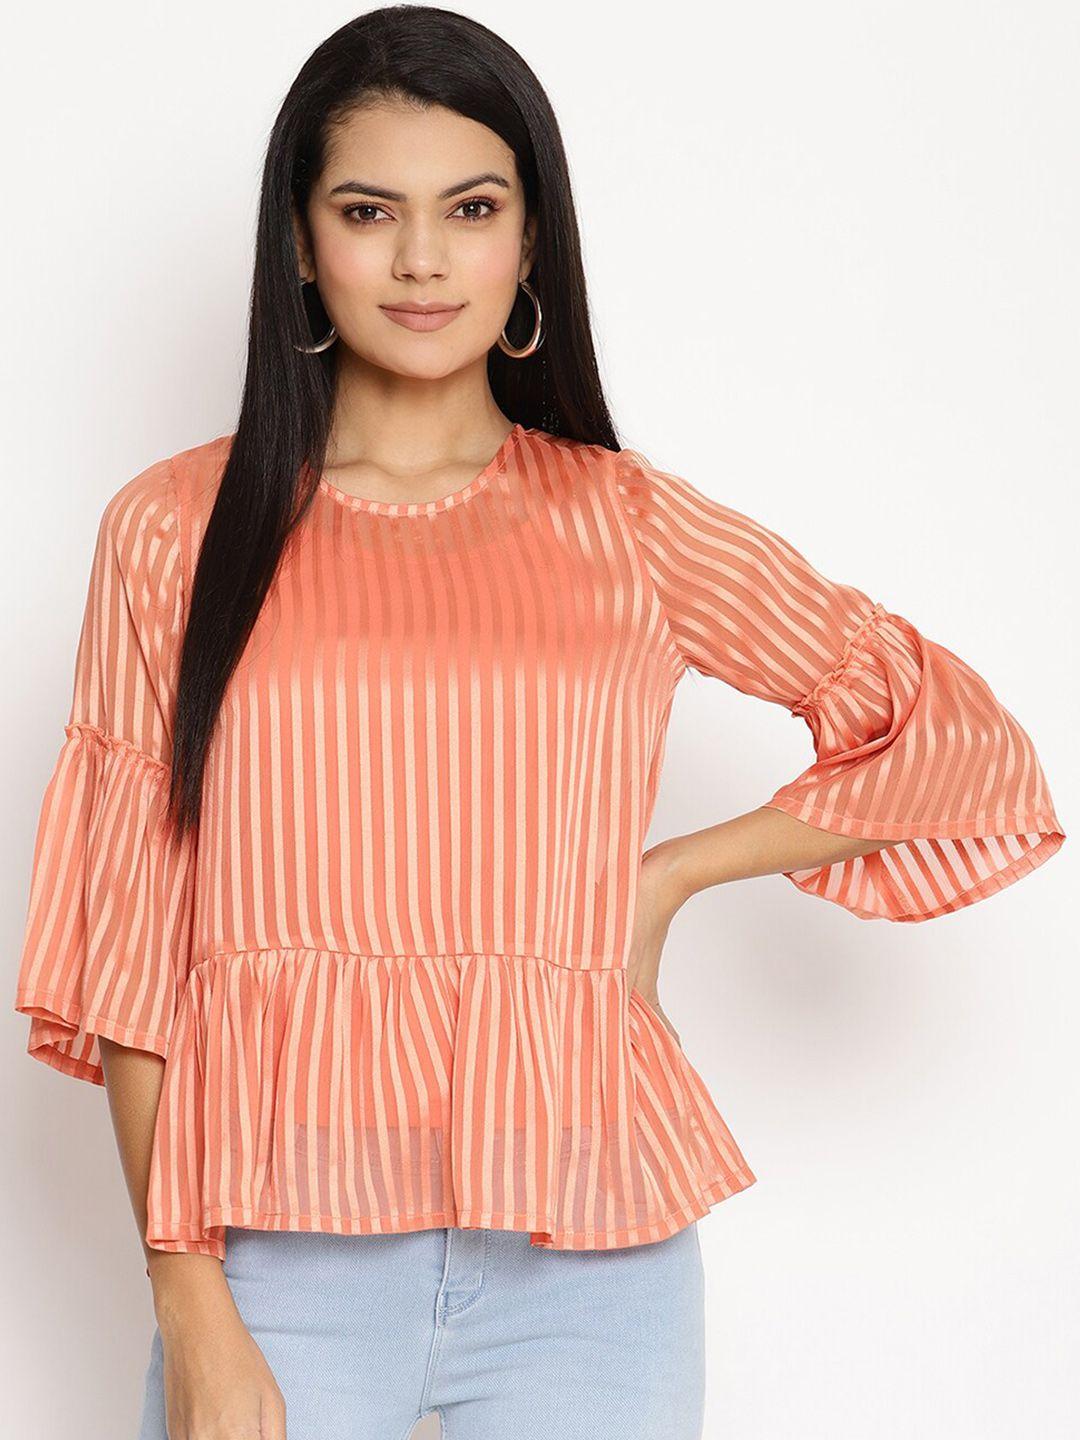 house of kkarma coral striped georgette top